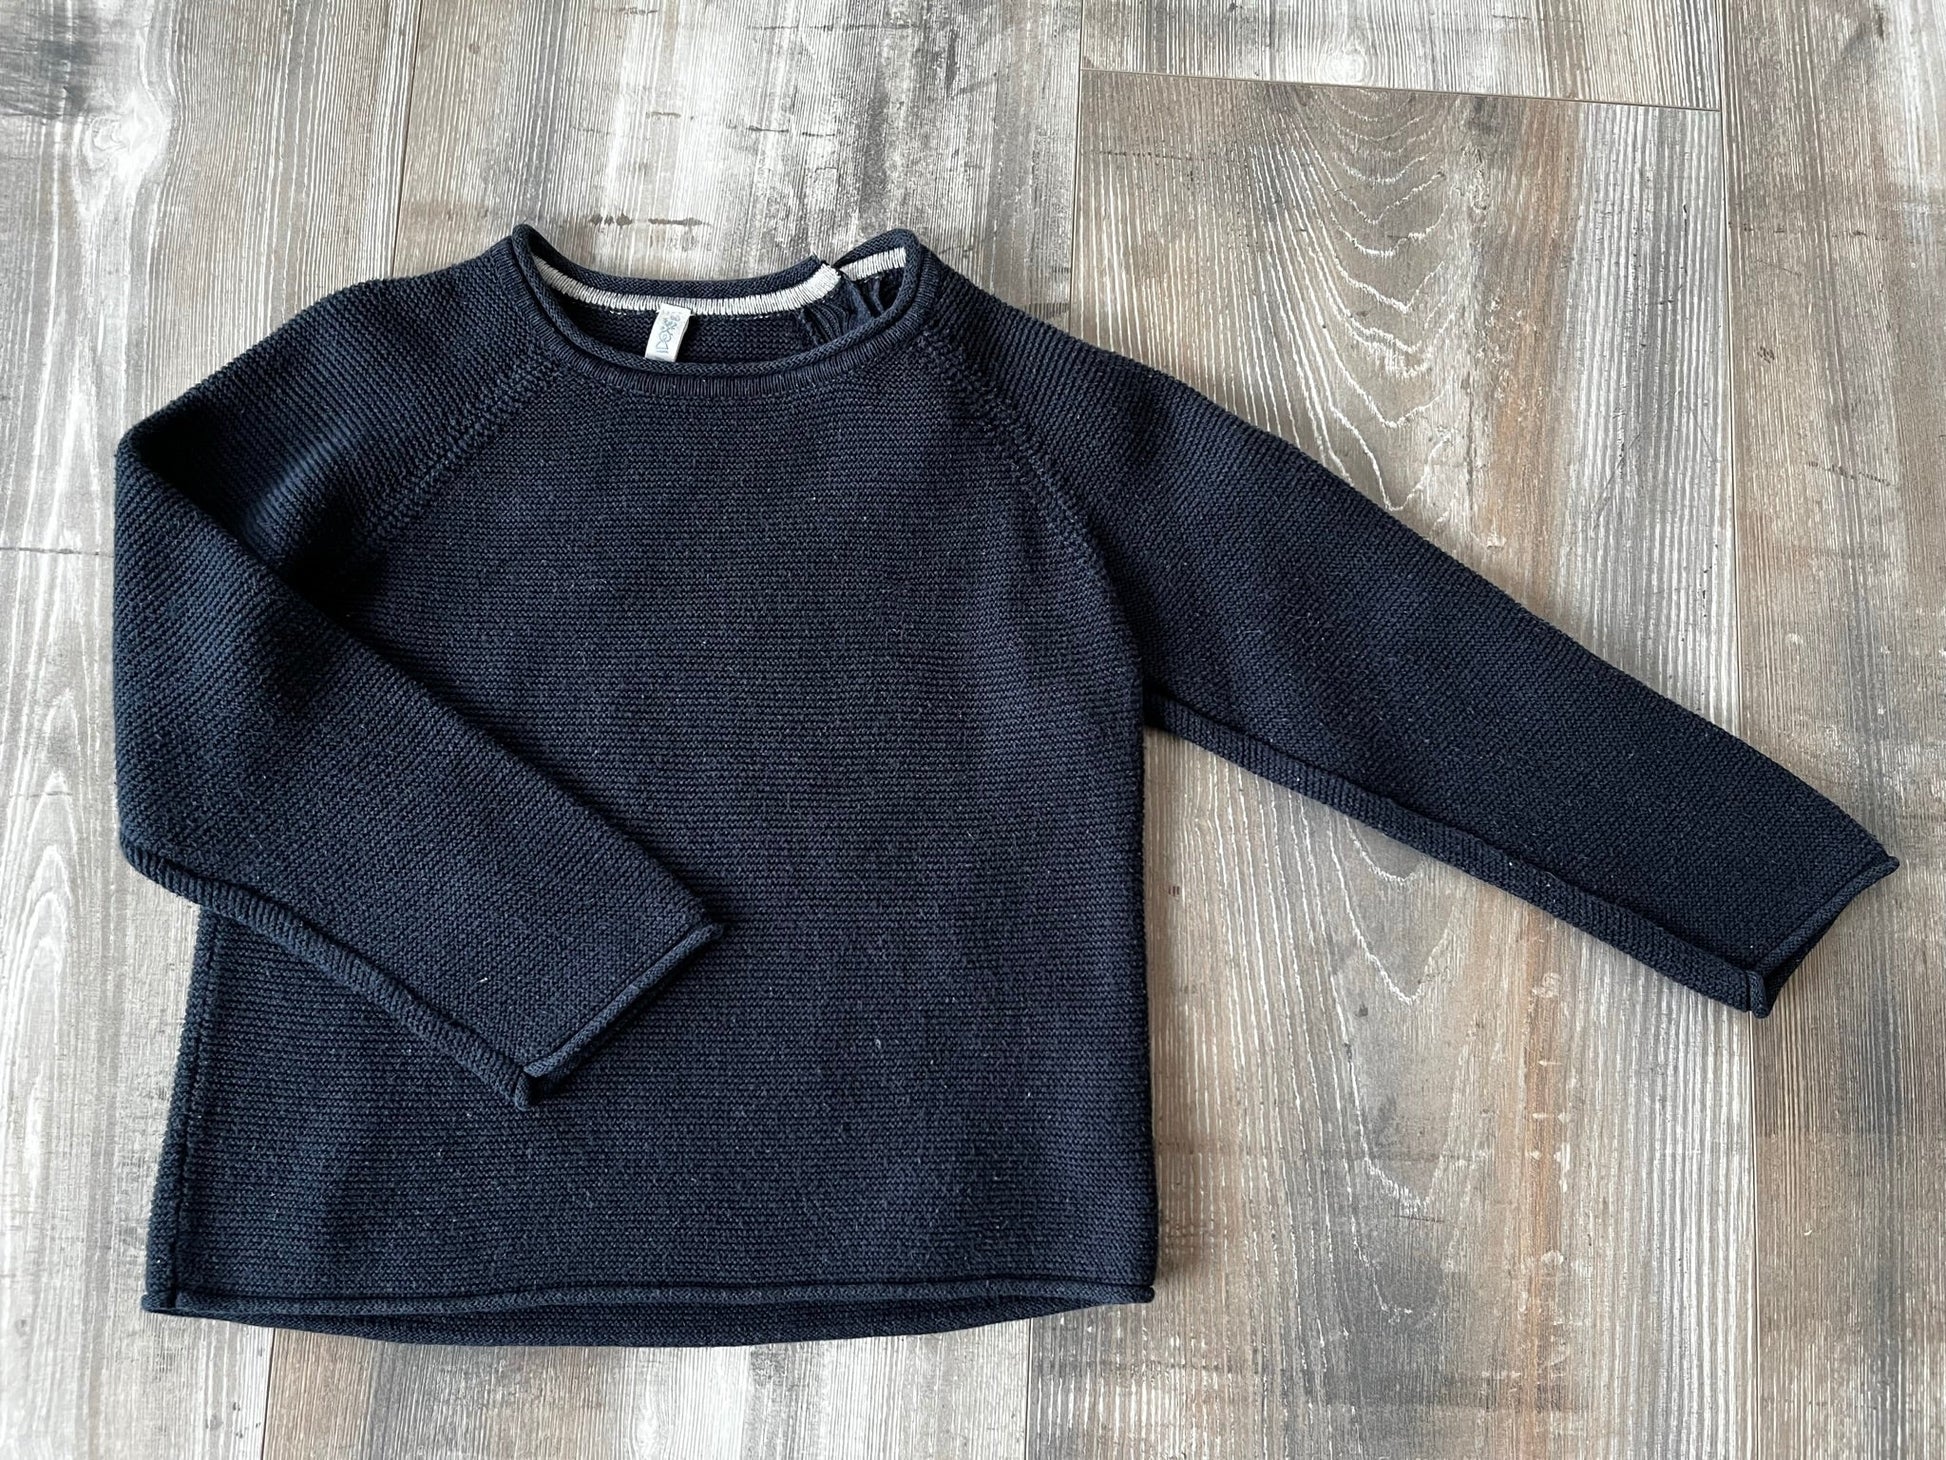 Pullover Blue Gr. 74 - 80 "Second Hand" - Siliblu Boutique & Atelier